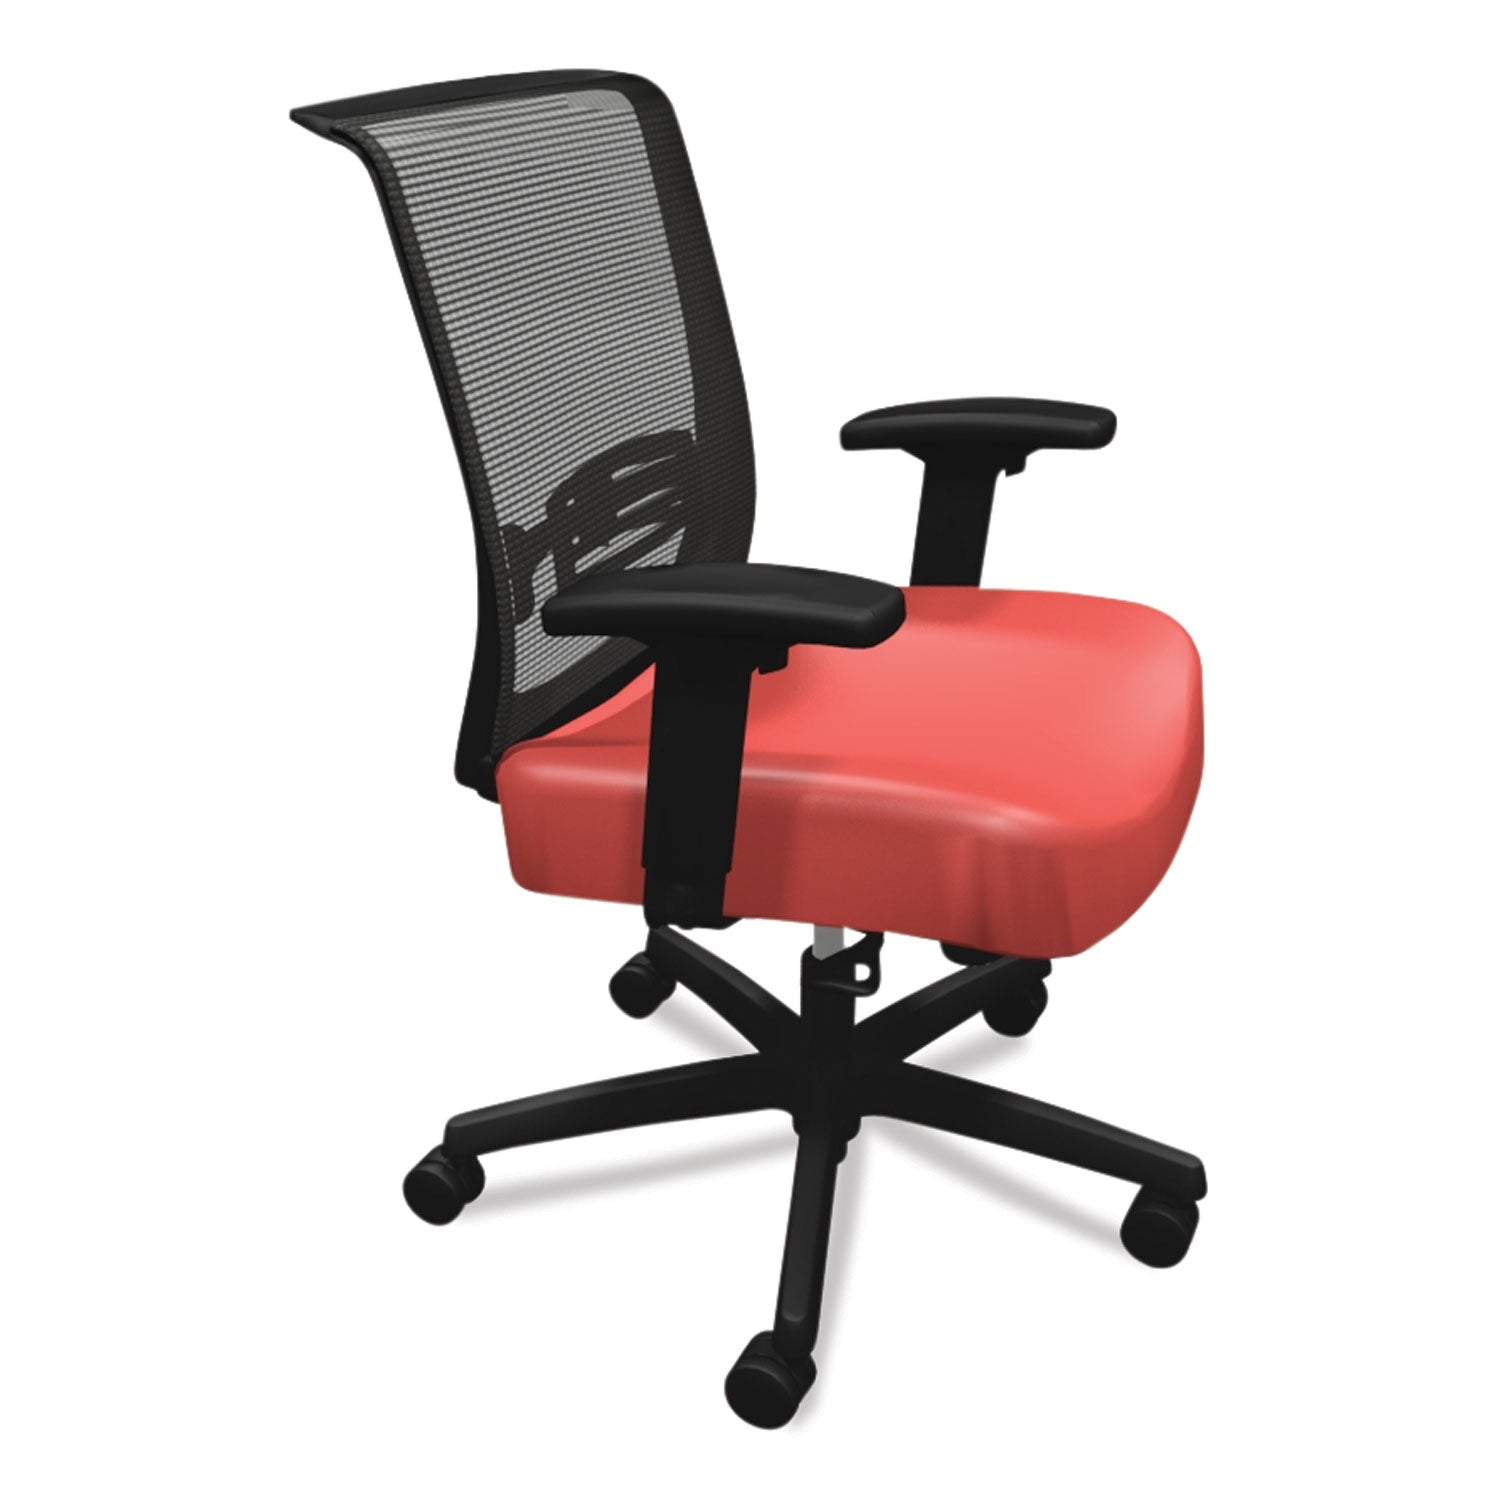 Convergence Mid-Back Task Chair, Swivel-Tilt, Supports Up to 275 lb, 16.5" to 21" Seat Height, Red Seat, Black Back/Base